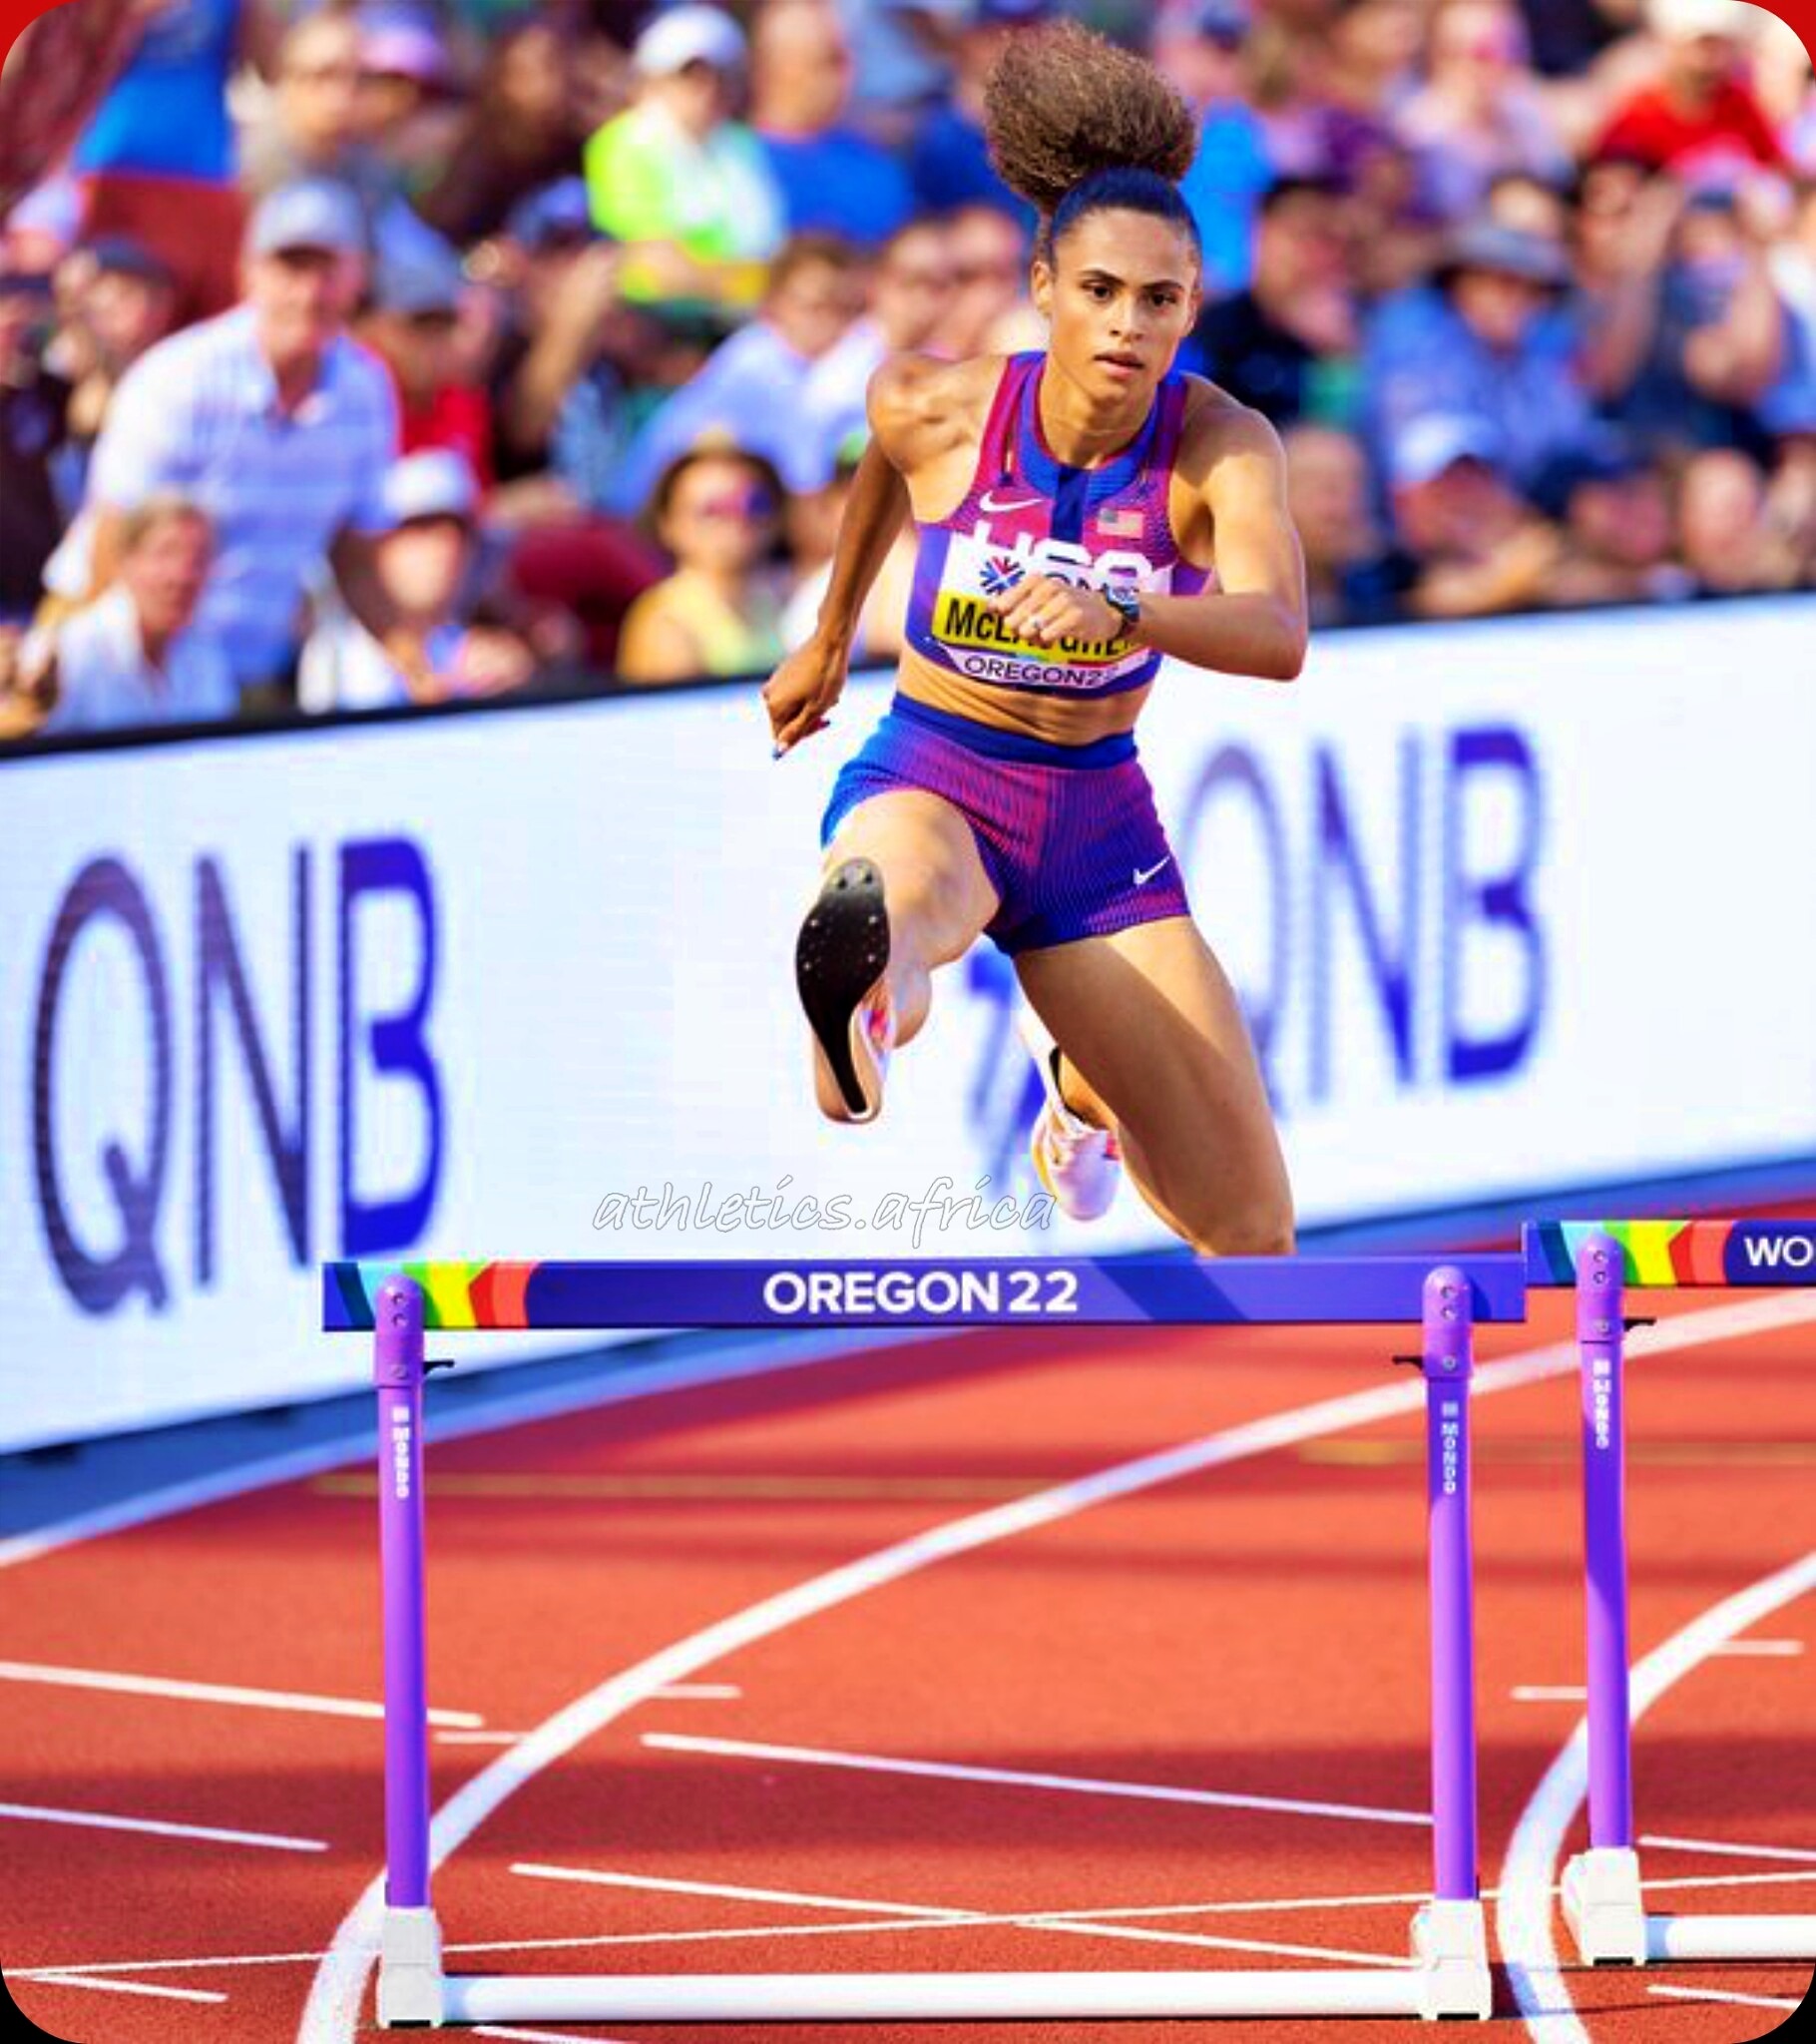 Sydney McLaughlin on her way to breaking the world 400m hurdles record in Oregon (© Getty Images)